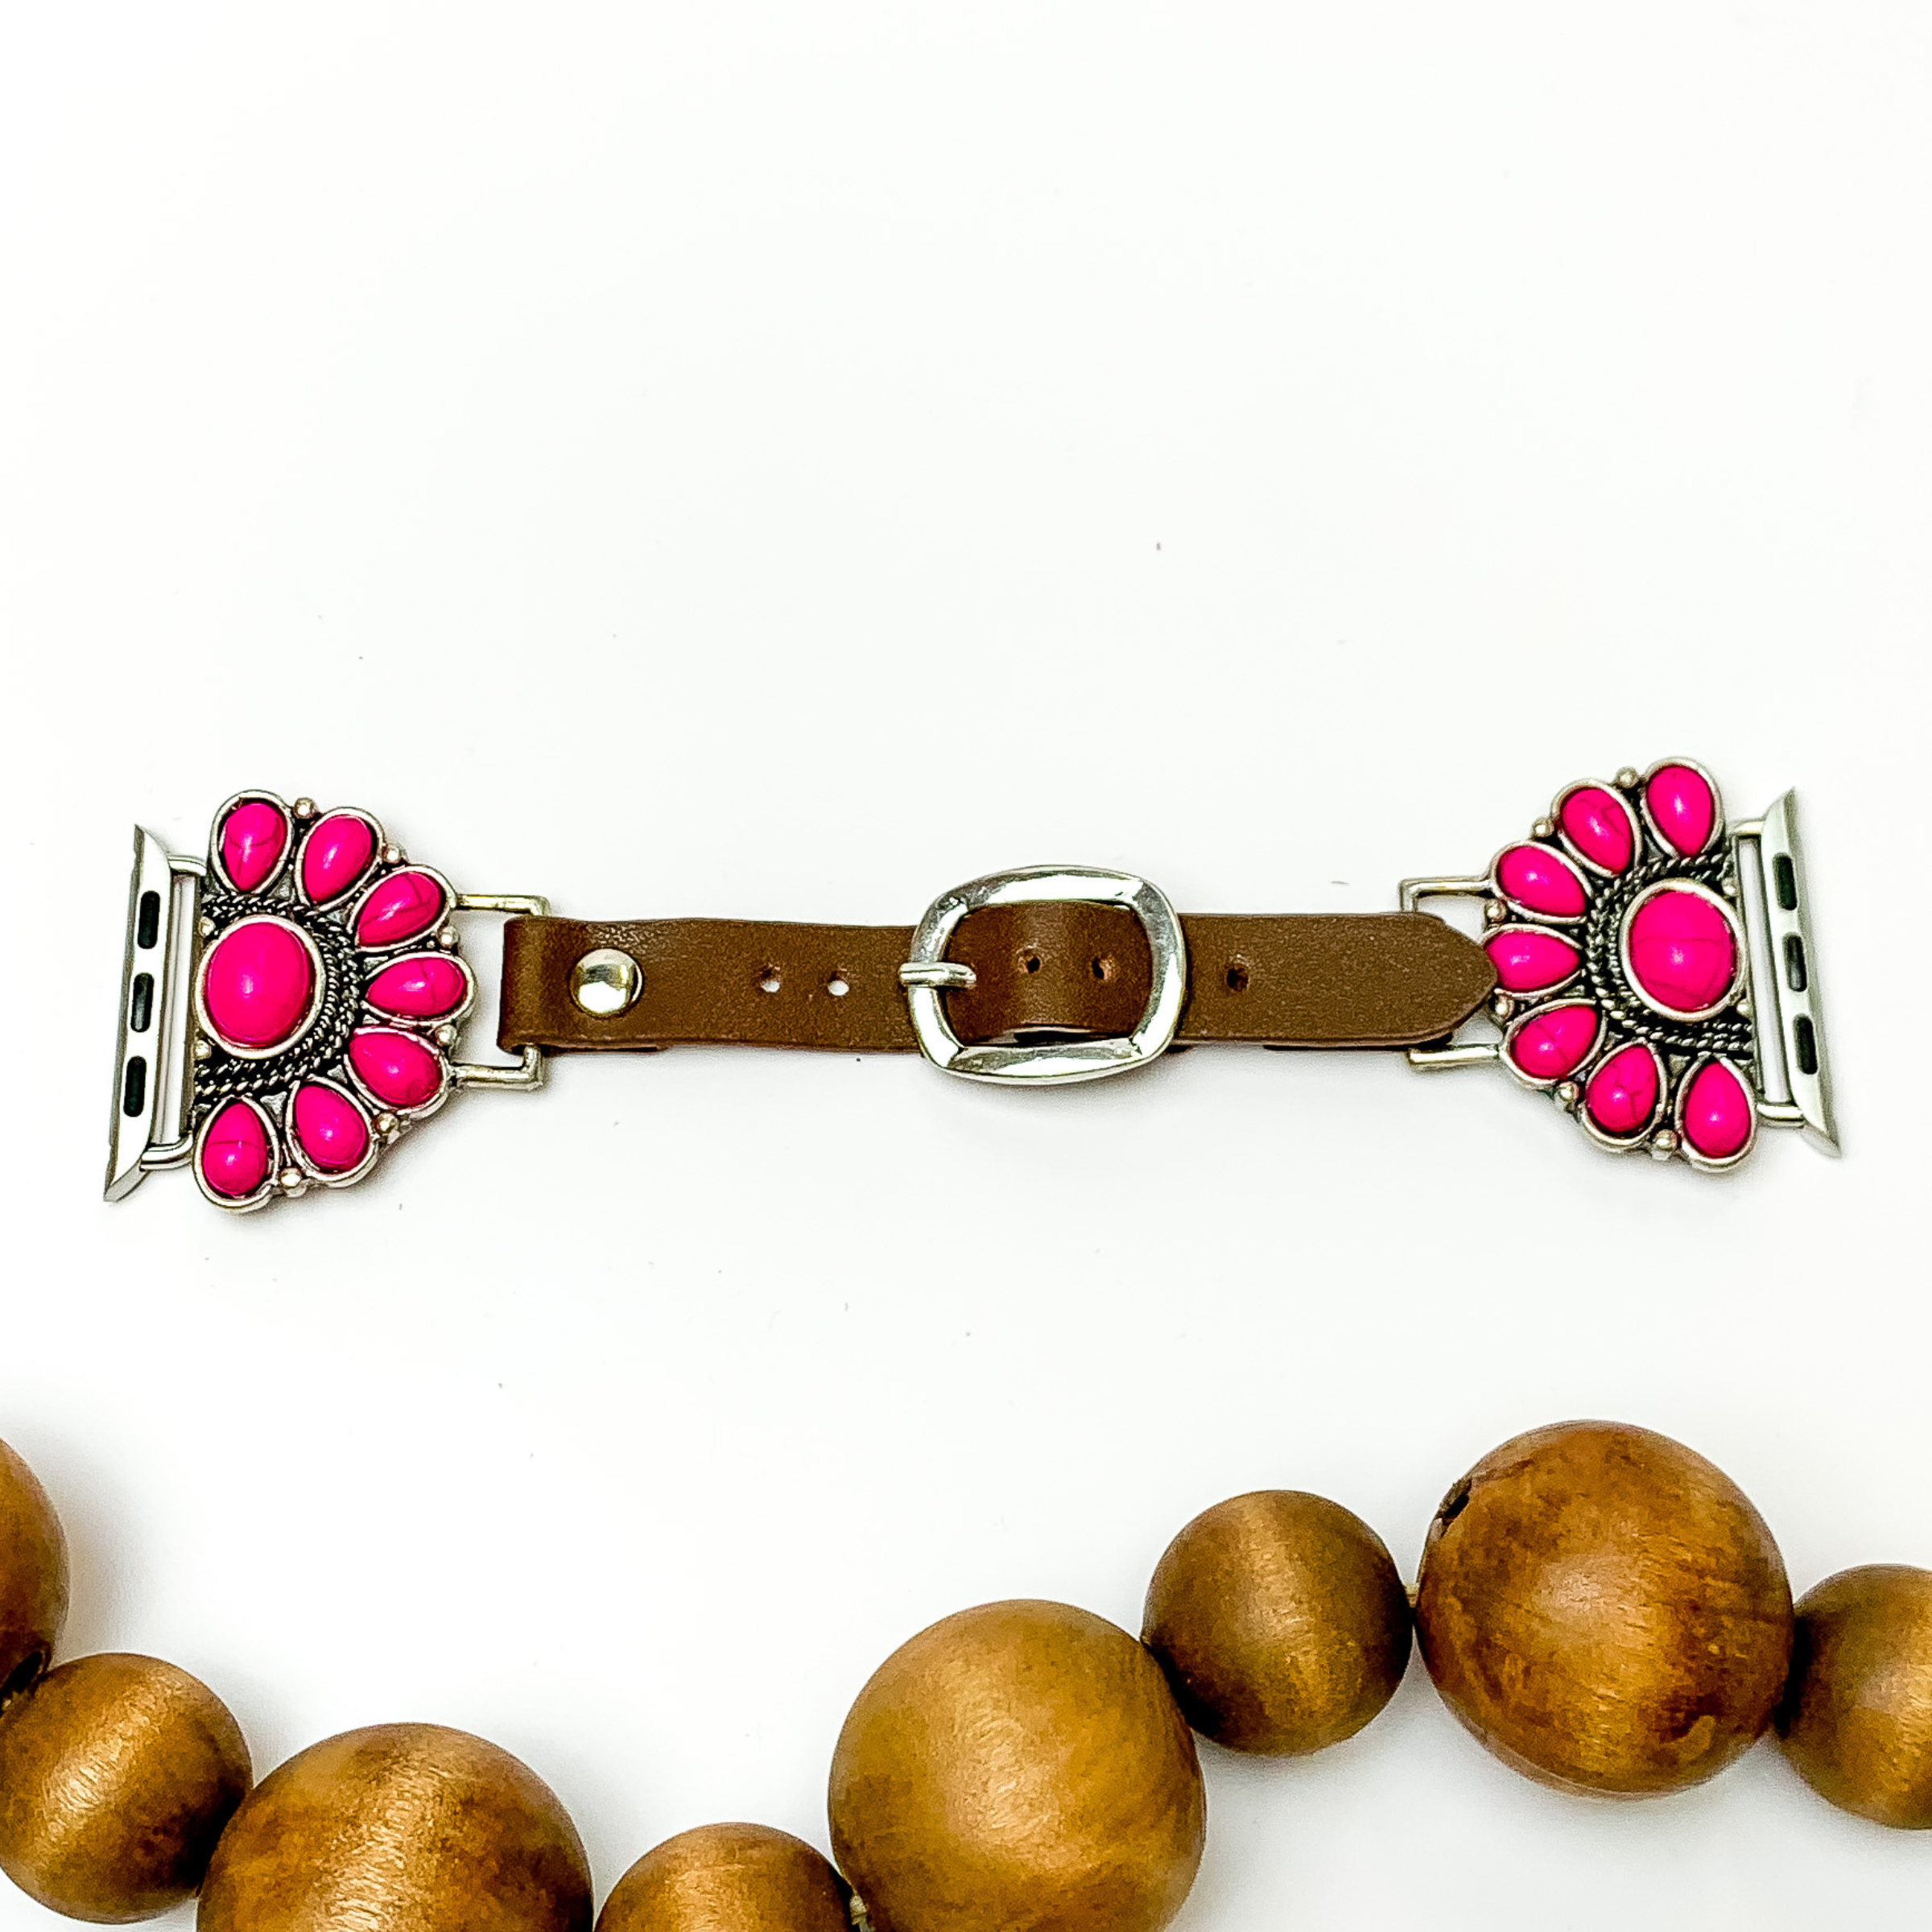 Dark Brown watch band with half, stone cluster pendants and Apple watch band acessories. The pendants include fuchsia stones. This watch band is pictured on a white background with brown beads below the band. 